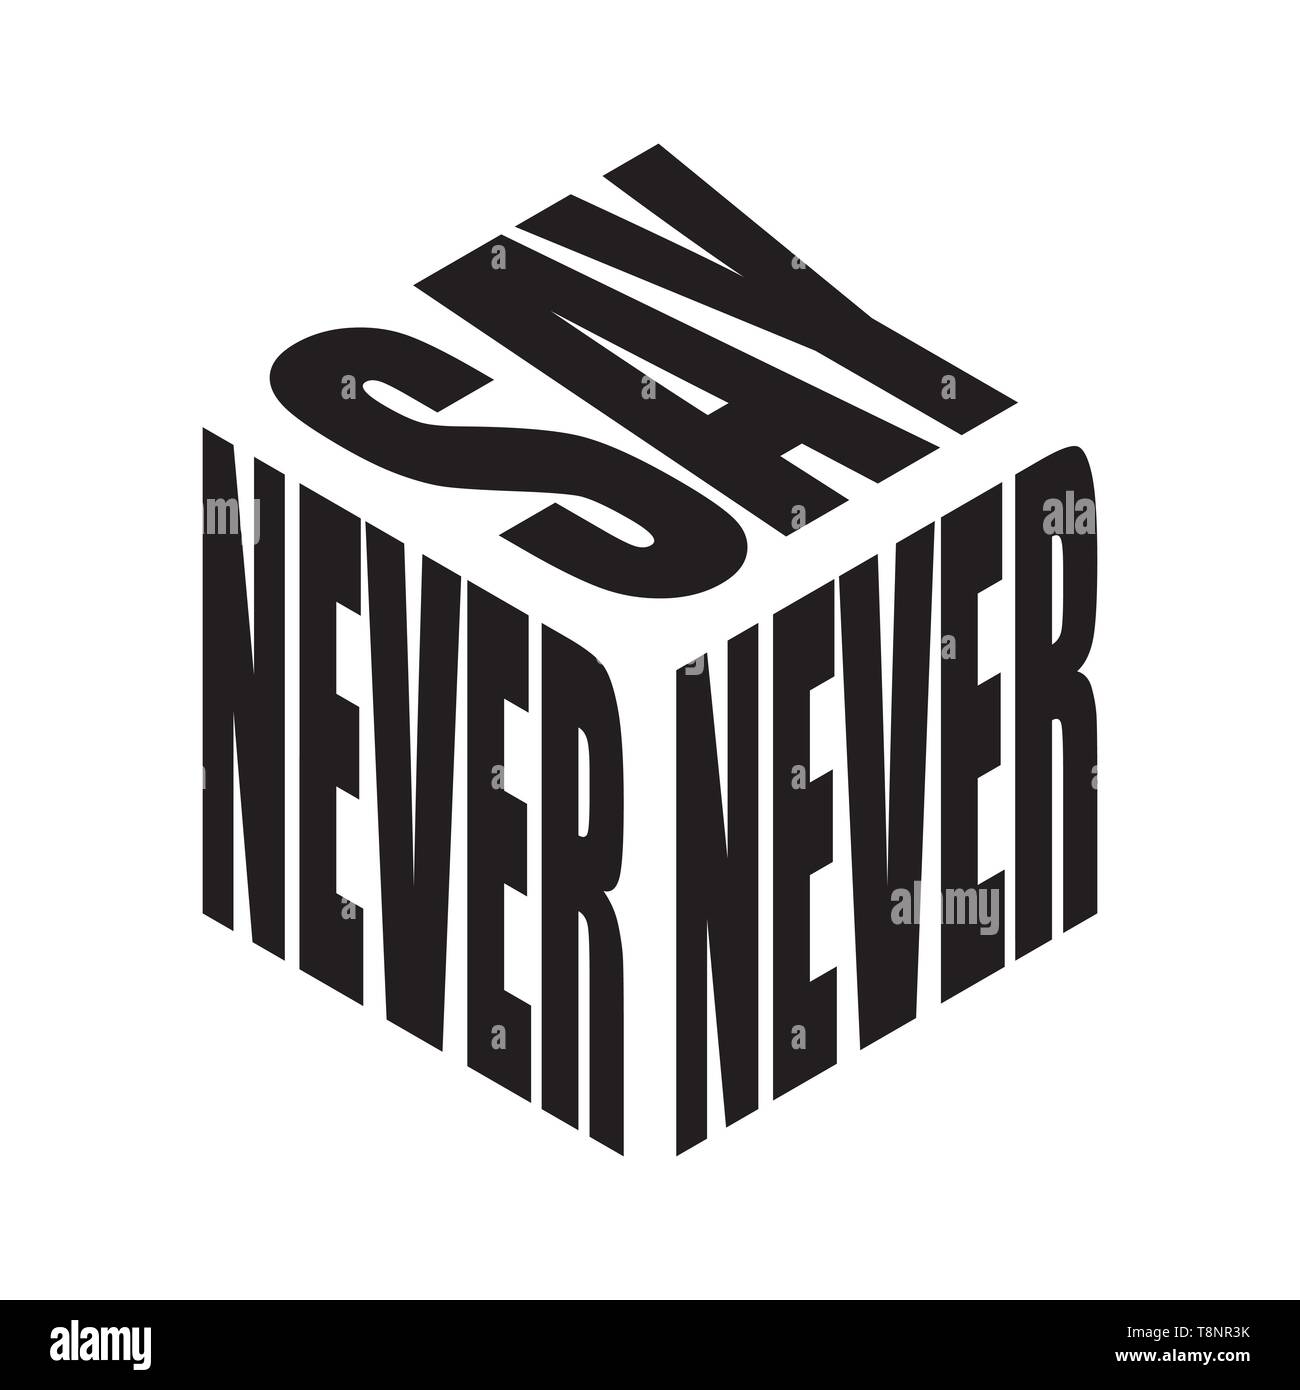 Never say. Simple text slogan t shirt. Graphic phrases vector for ...